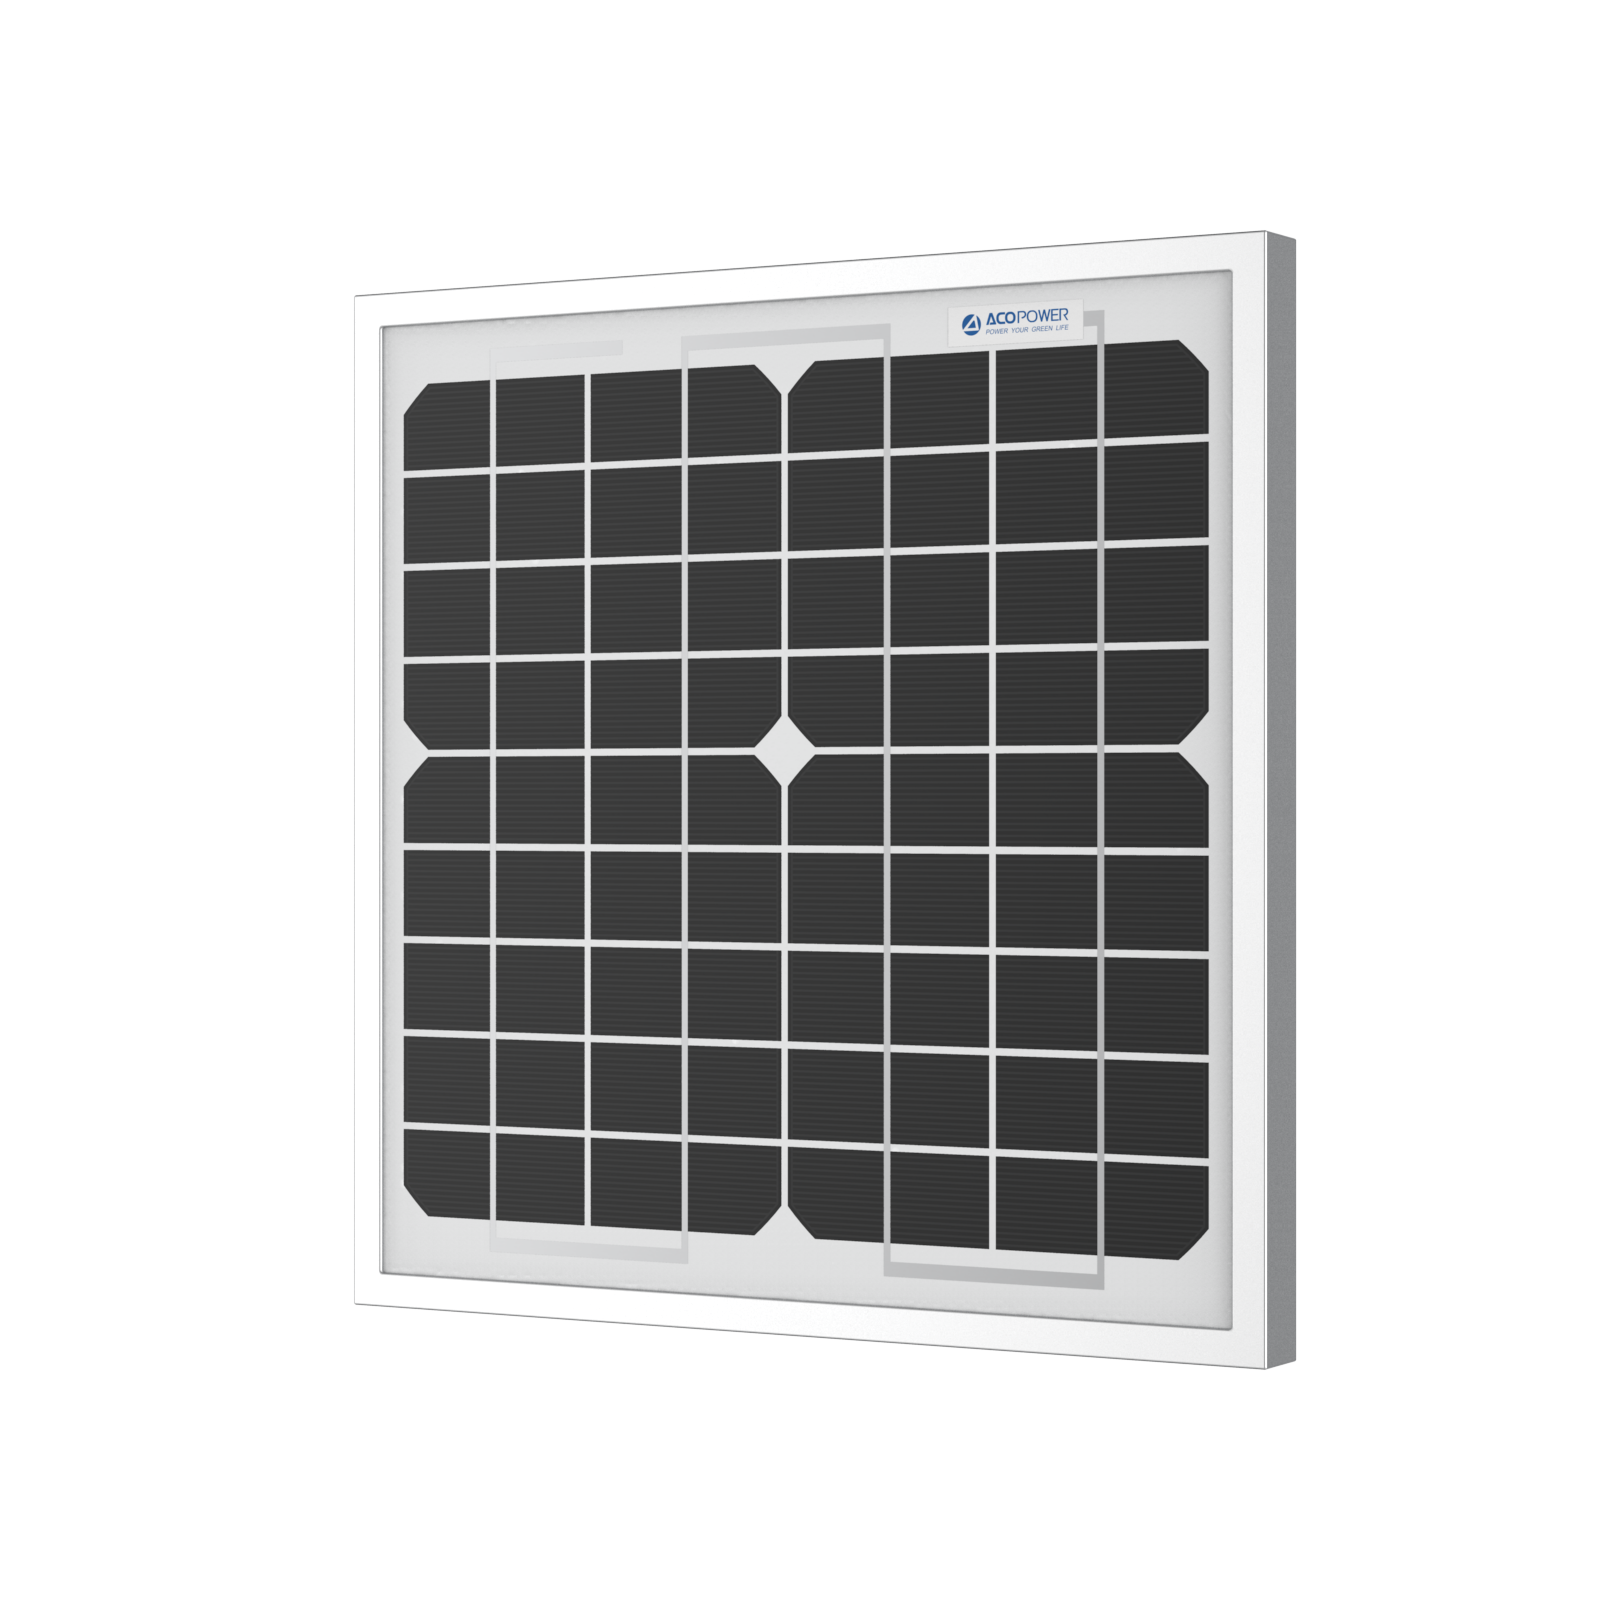 ACOPower 10W Mono Solar Panel for 12V Battery Charging RV Boat, Off Grid